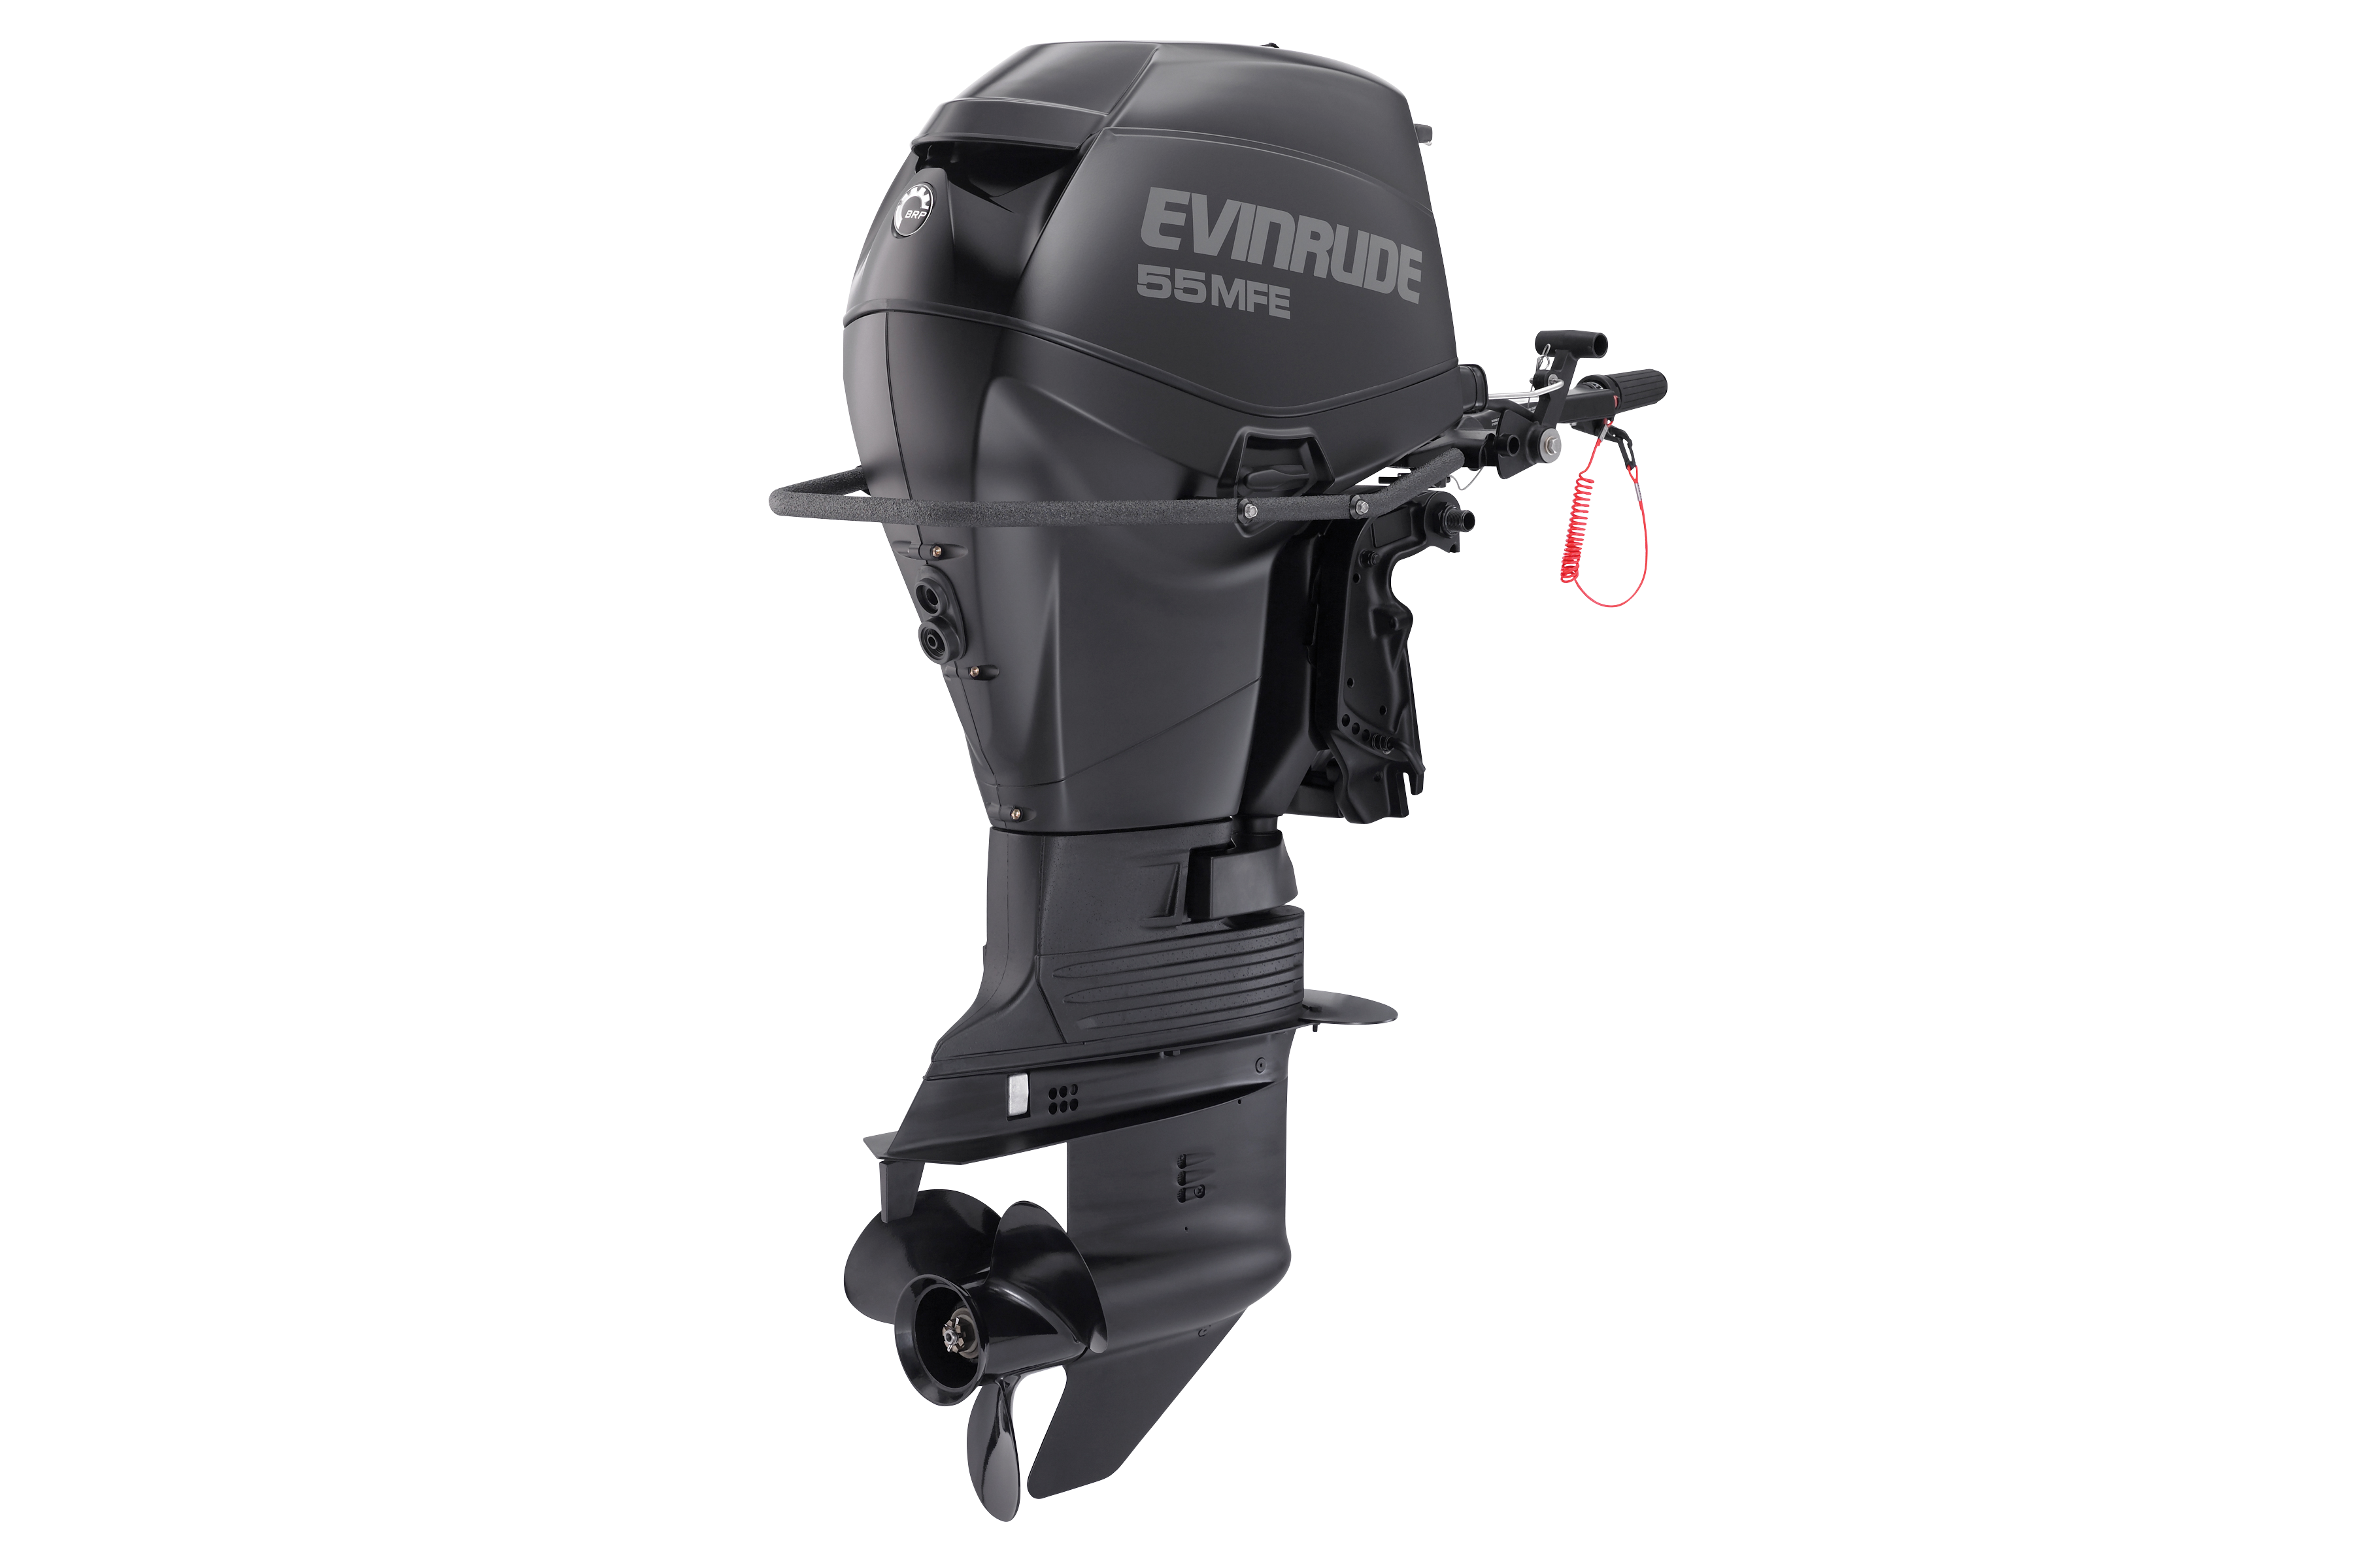 Multi-fuel engines Outboard Motor 2019 by Evinrude